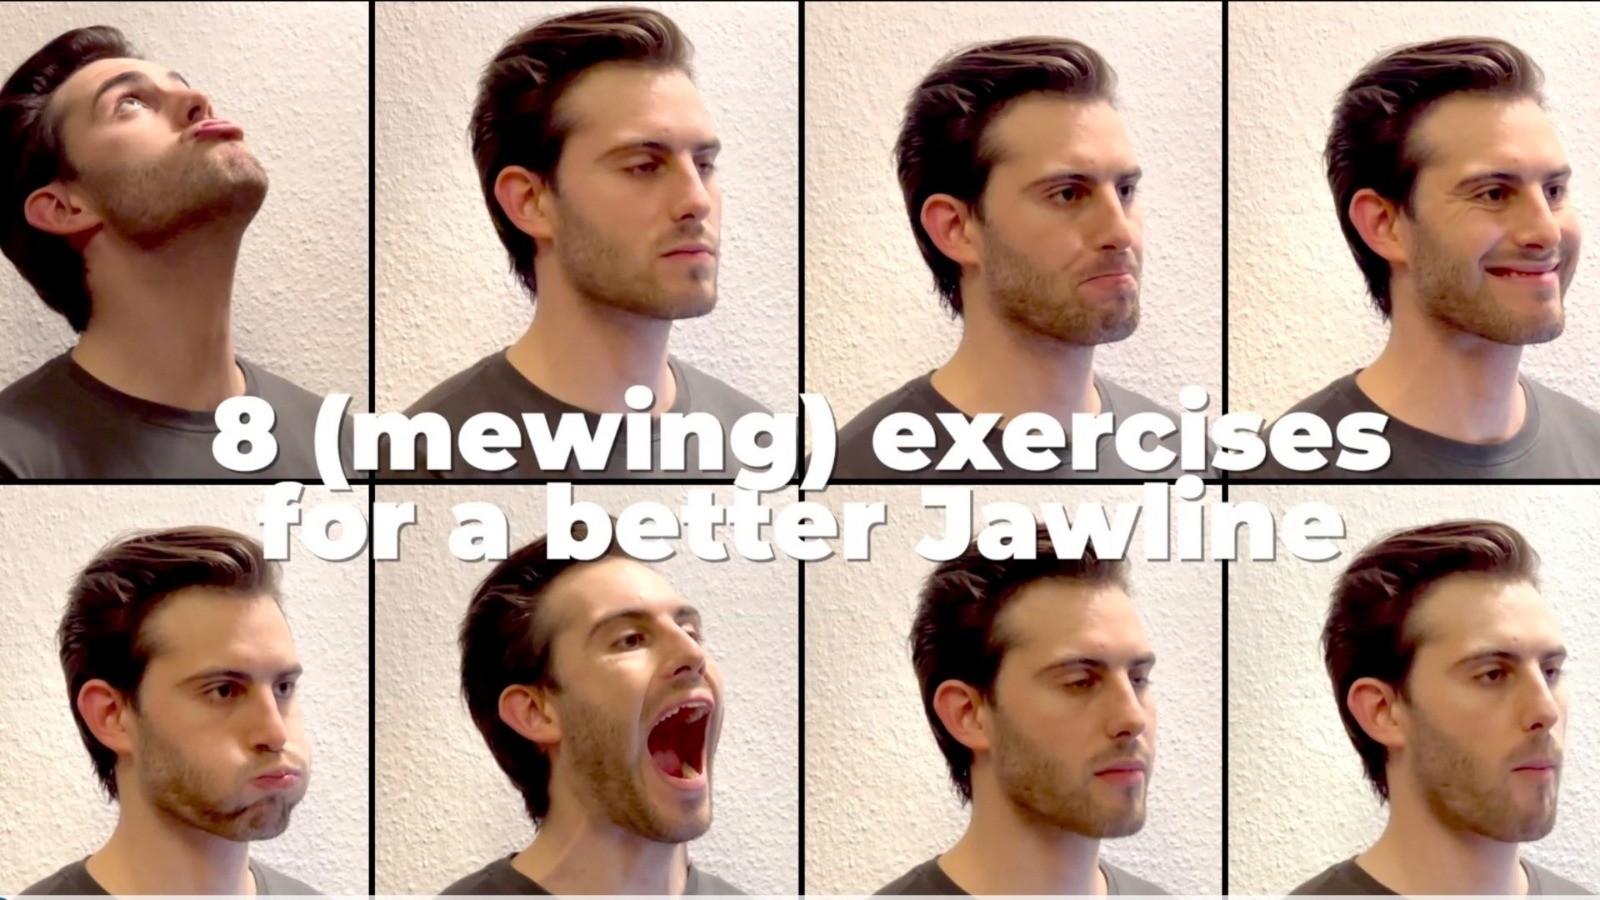 How to Get a Well Chiseled Jawline Made Easy: A Simple Guide To Getting A  Chiseled Jawline (Paperback)